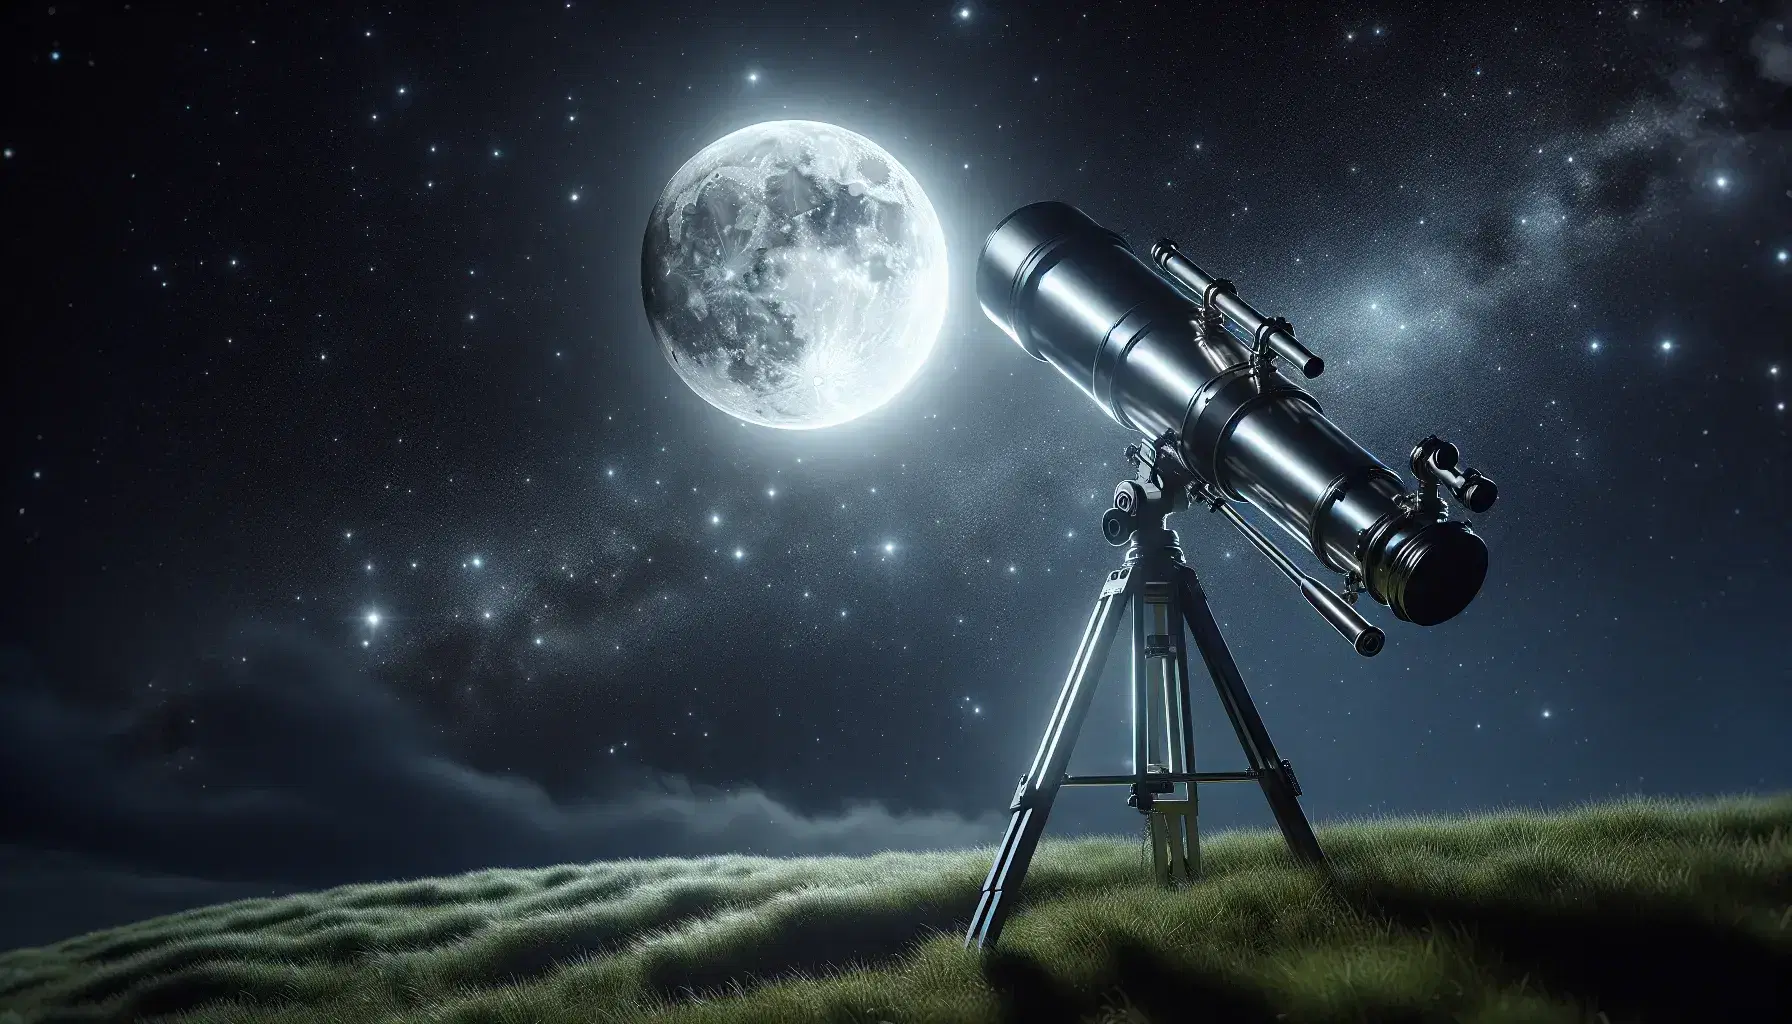 Starry night sky with a bright full moon above a telescope on a tripod, set on a grassy hill for celestial observation.